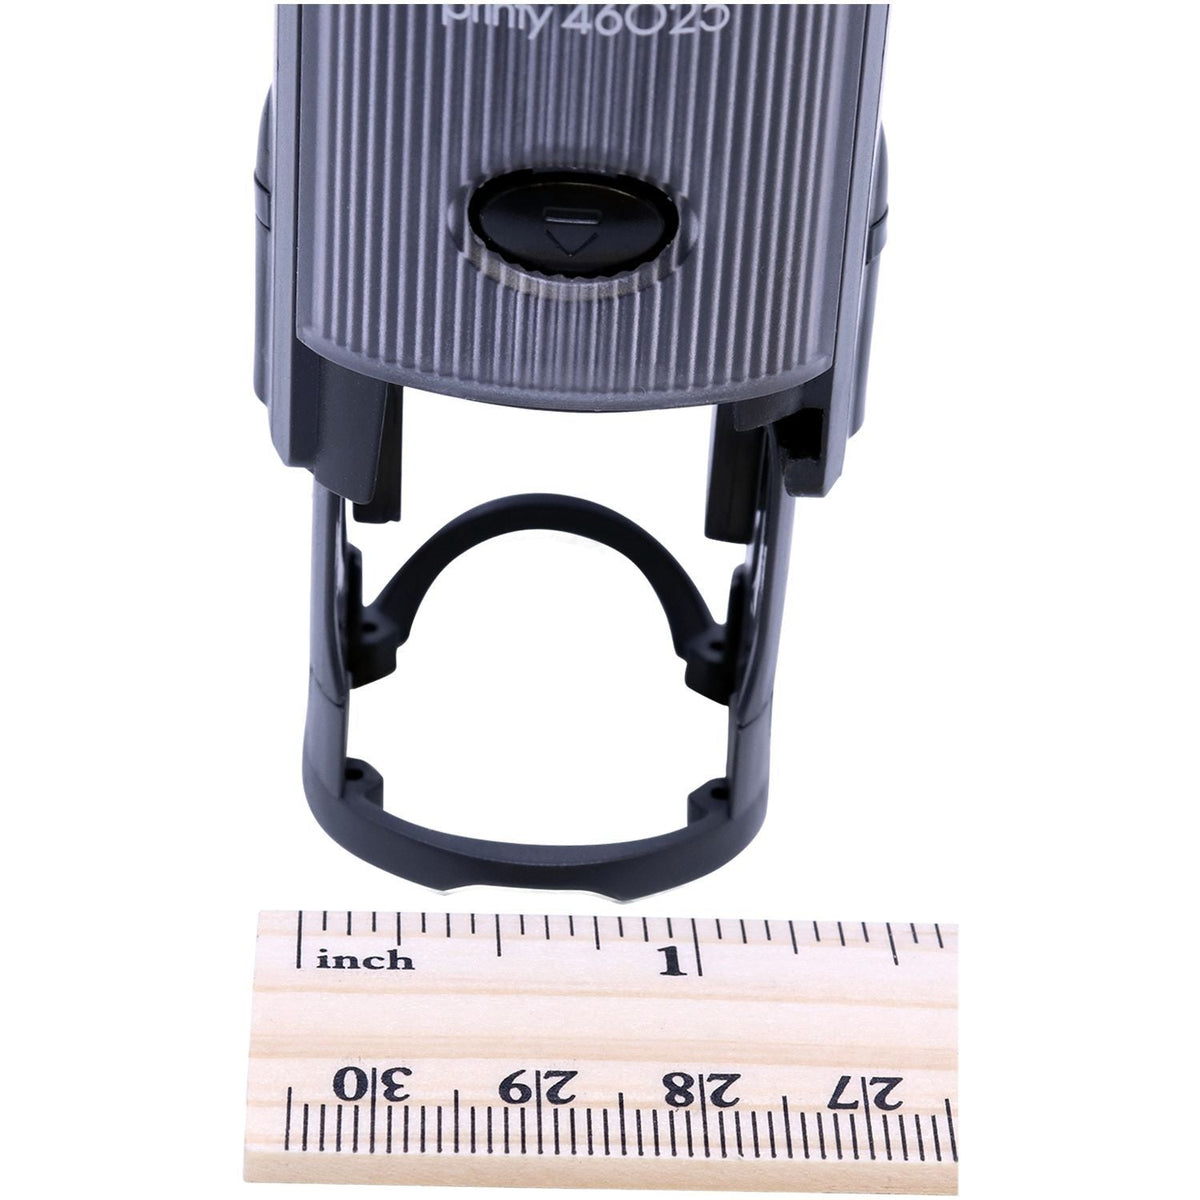 Measurment of Self-Inking Round Late Stamp with Ruler